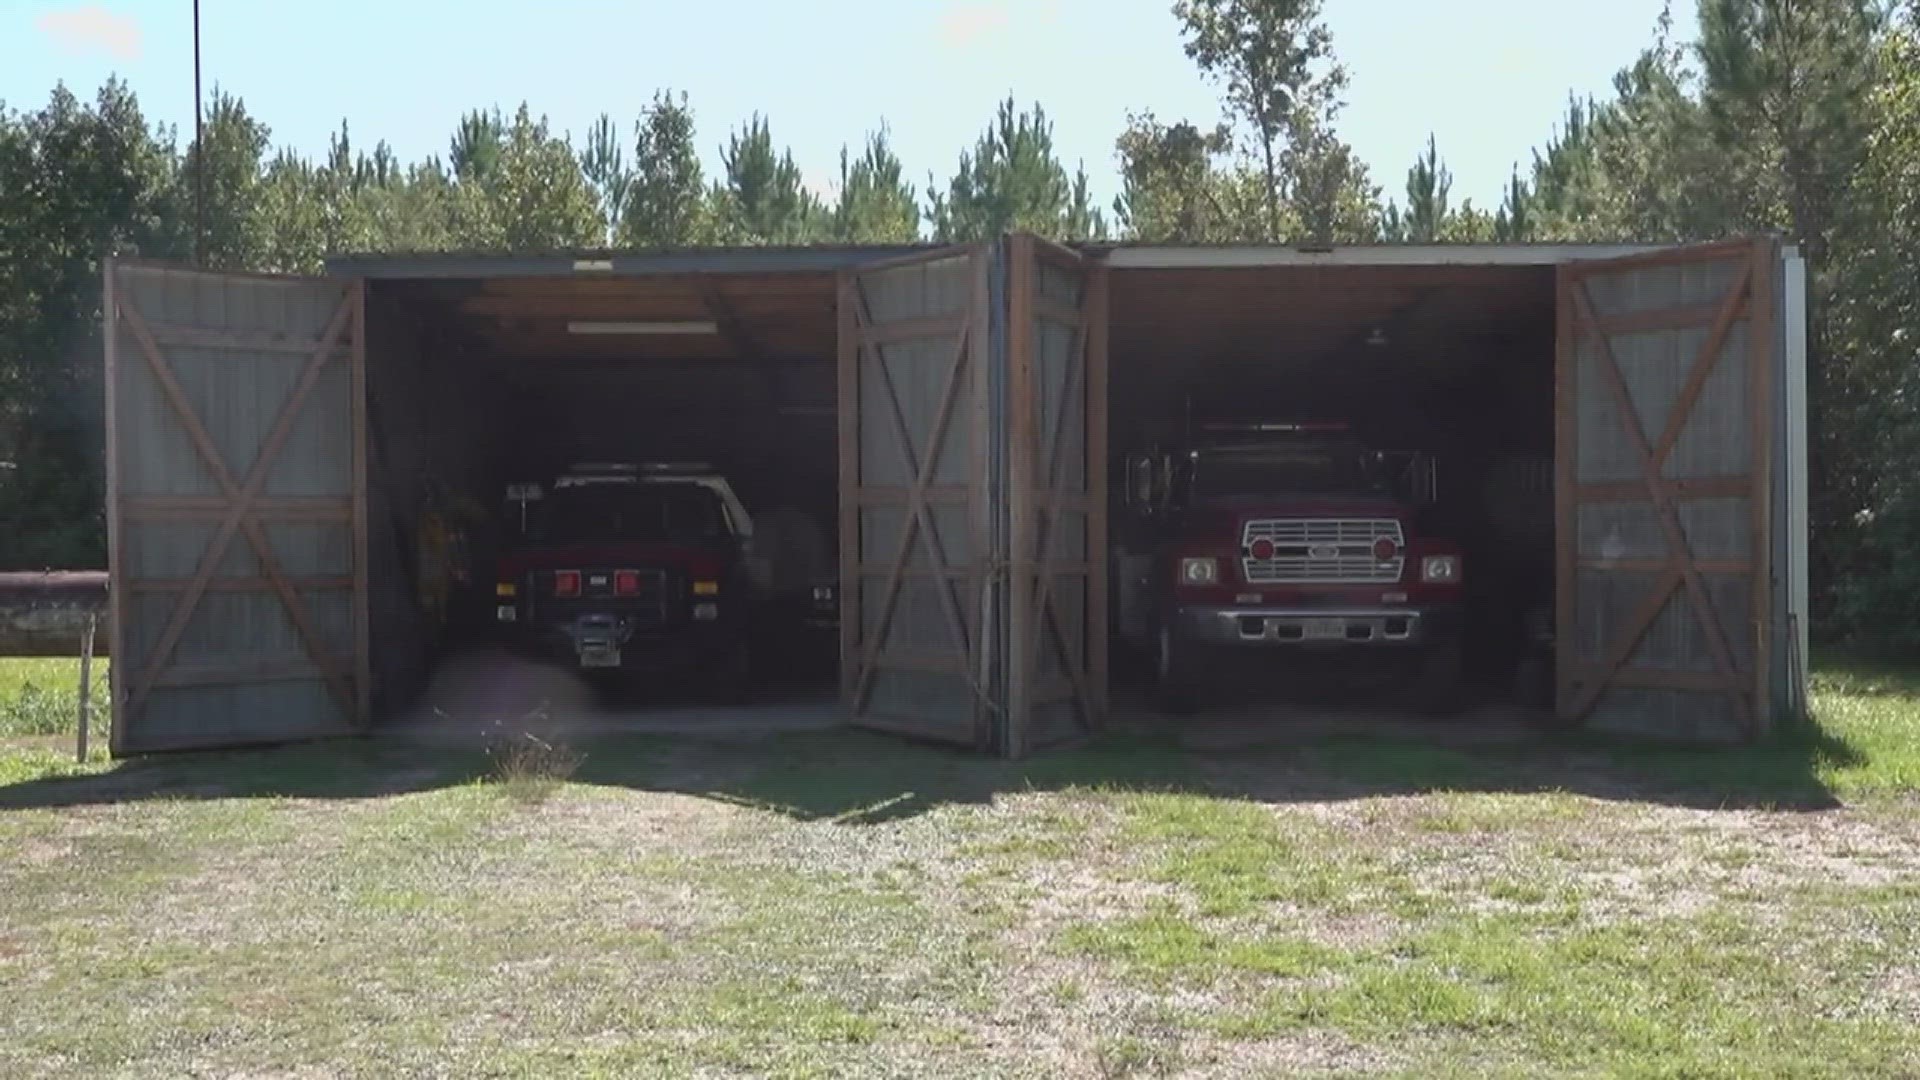 If voters approve the Emergency Service District (ESD) 7 Proposition A on November 7, it would turn the Votaw-Thicket Volunteer Fire Department into an ESD.